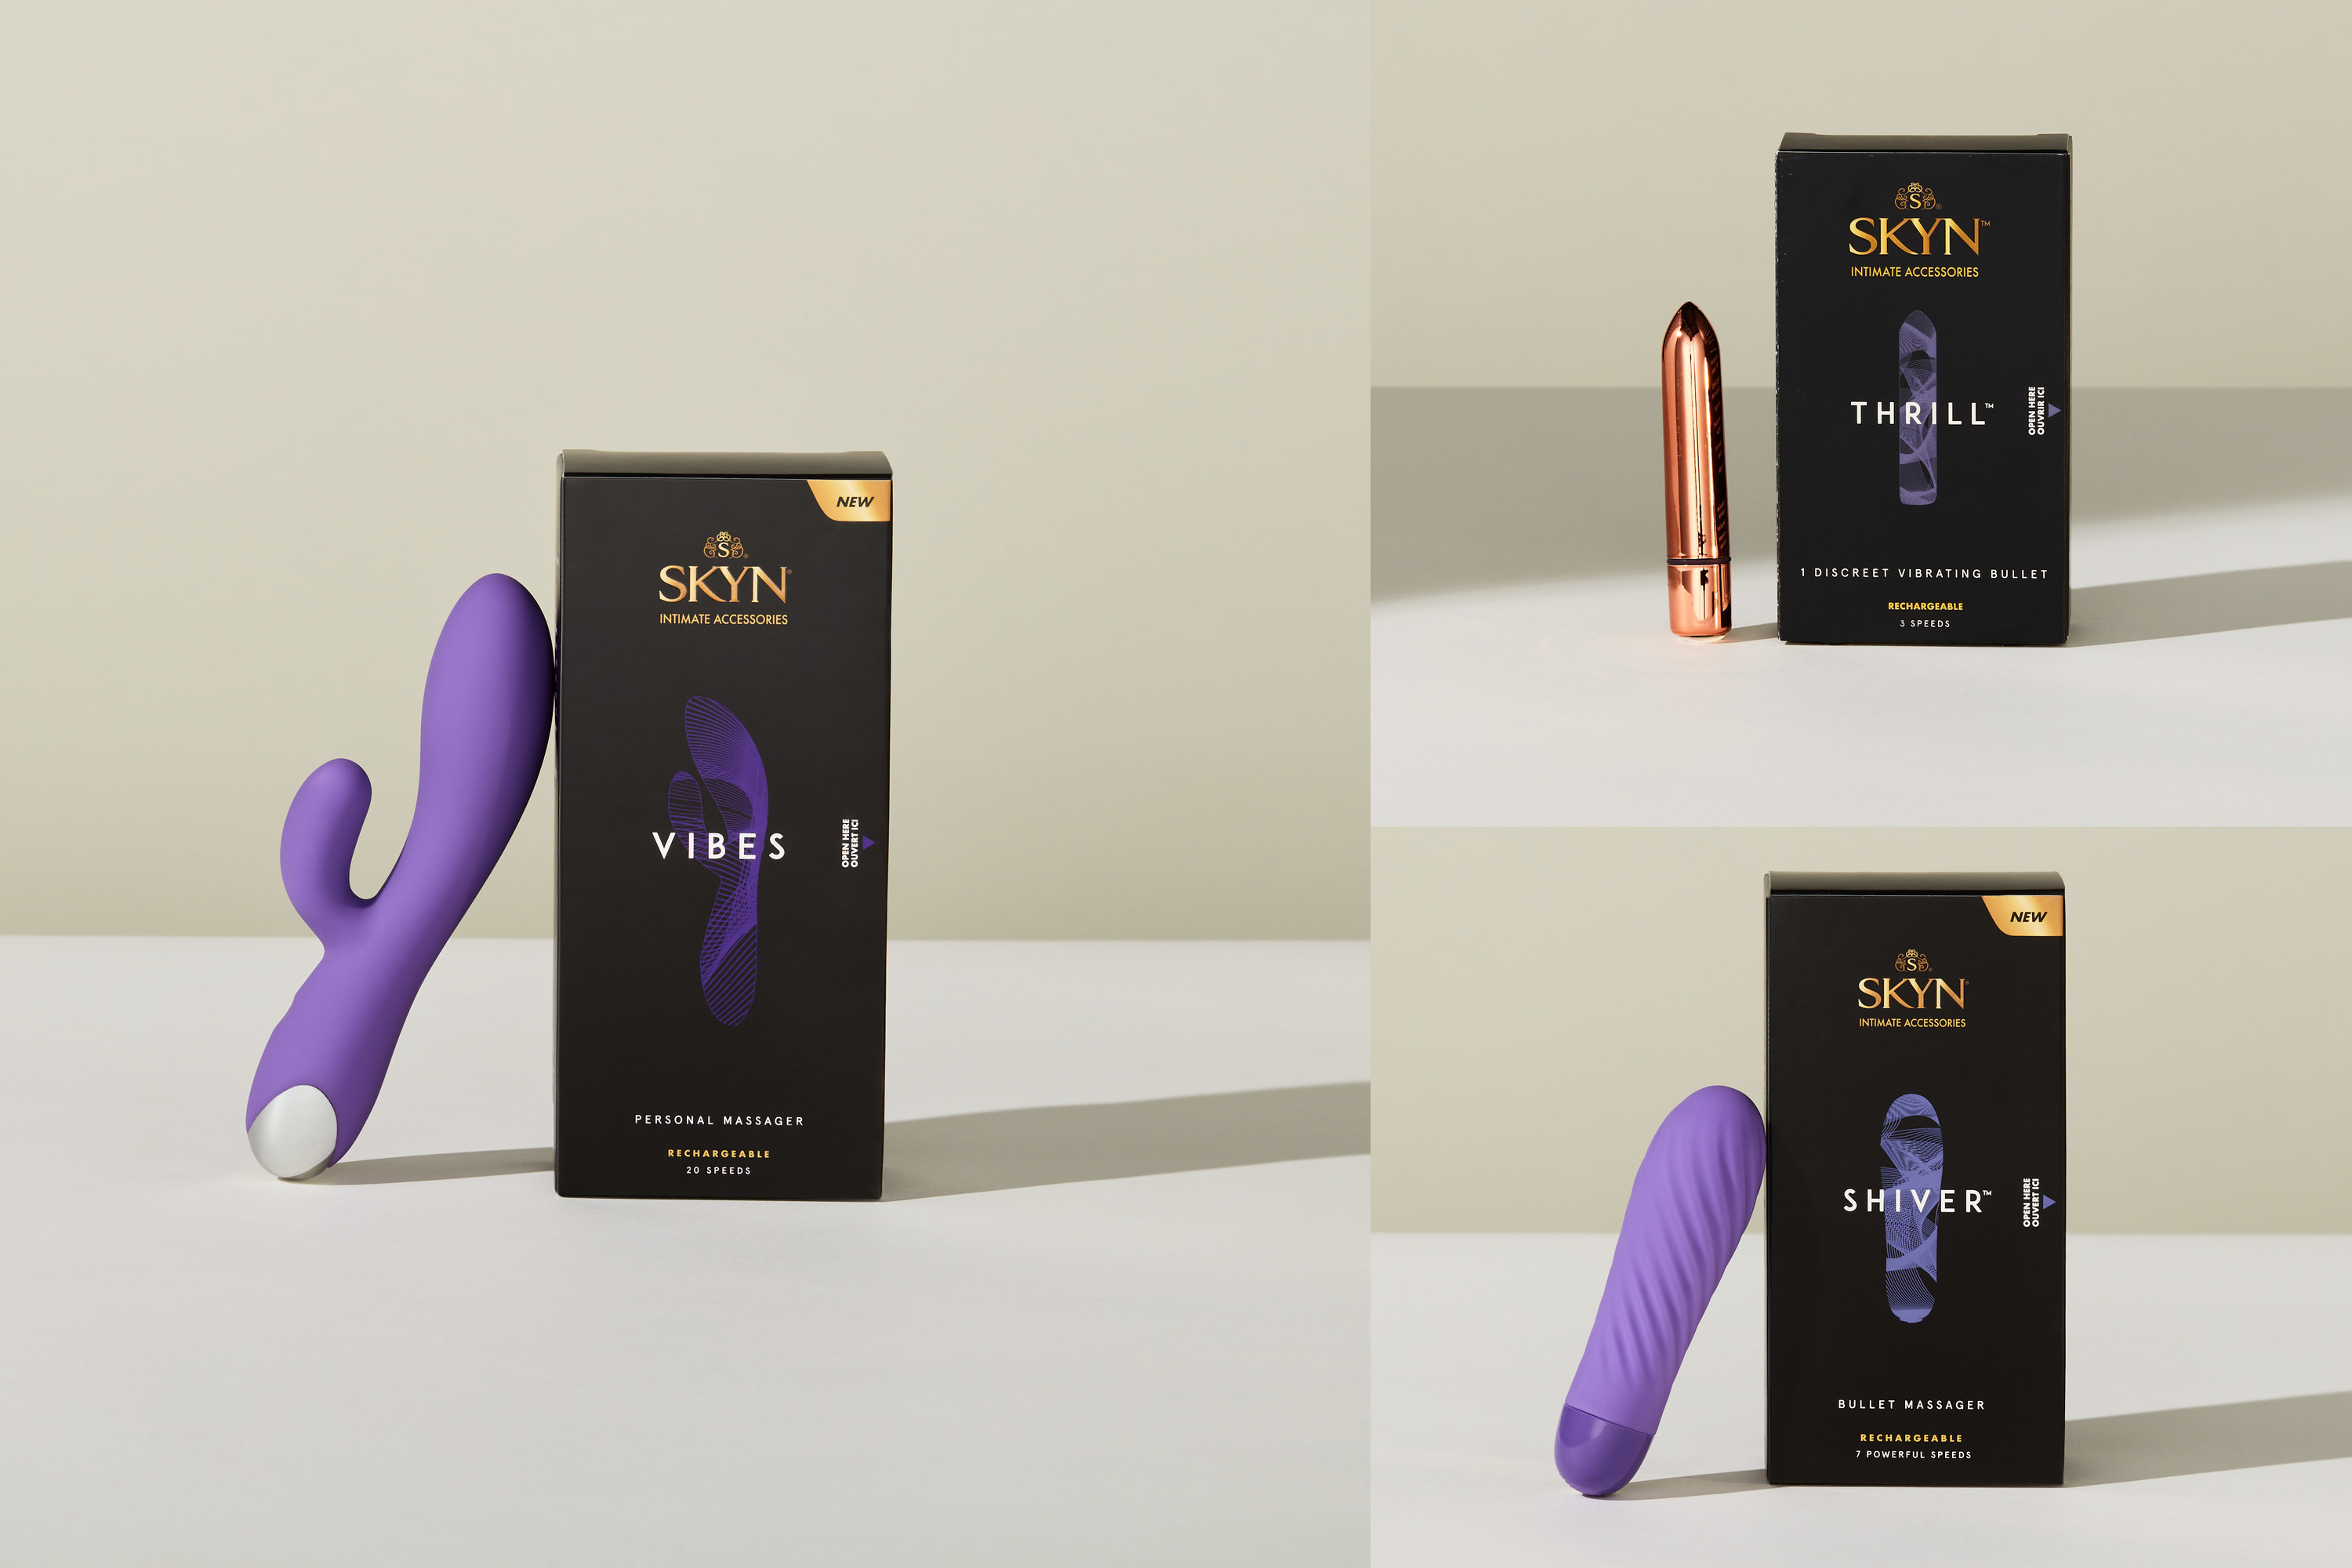 Skyn Vibes, Thrill, and Shiver personal massagers.